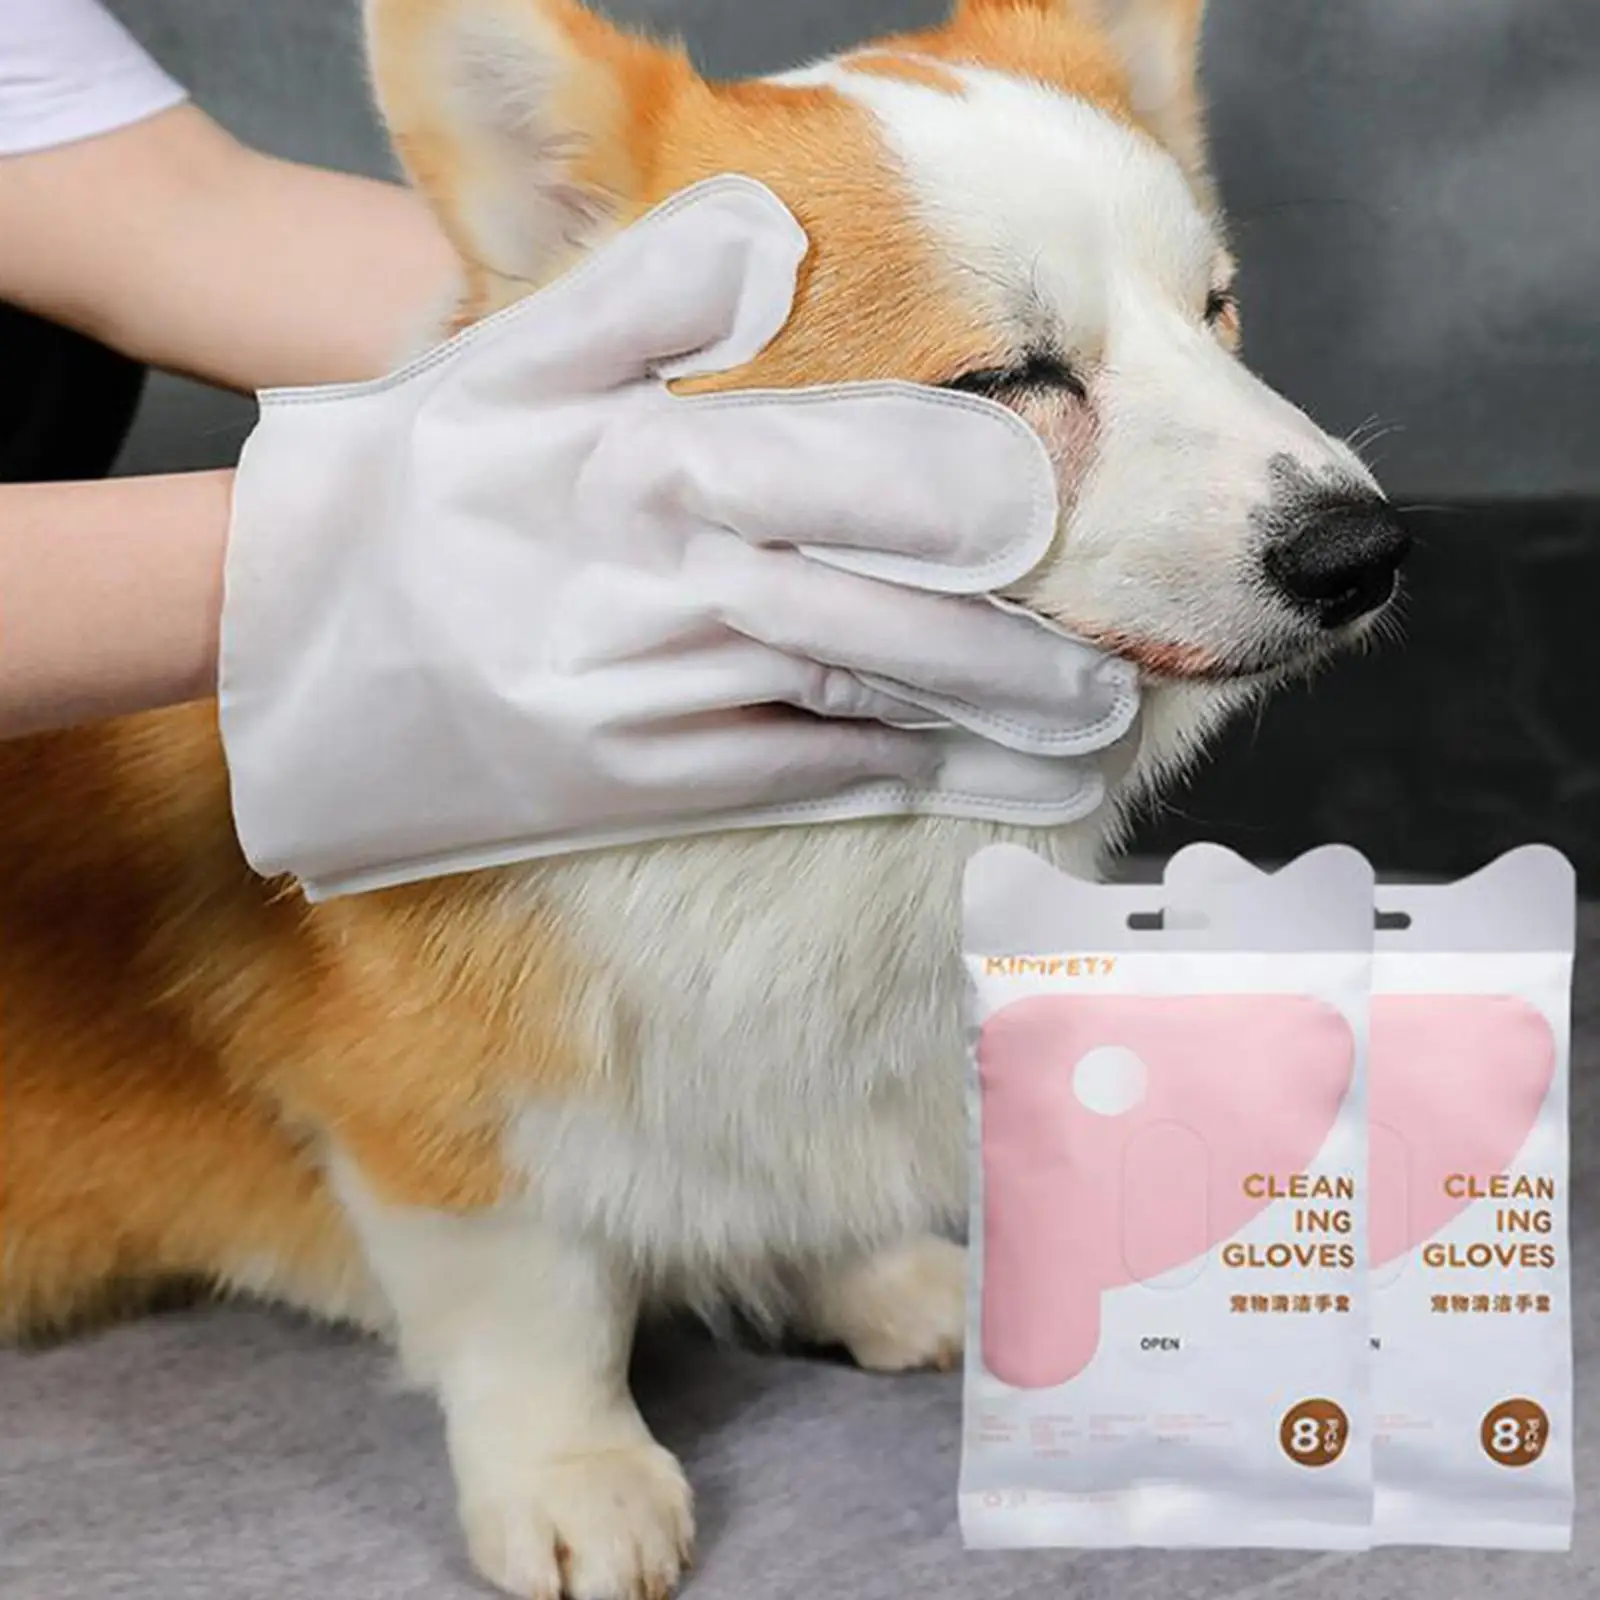 8Pcs/Pack Pet Grooming Gloves Large Towels wipe Puppy wipe Dust wipe Massage 5 Fingers Glove